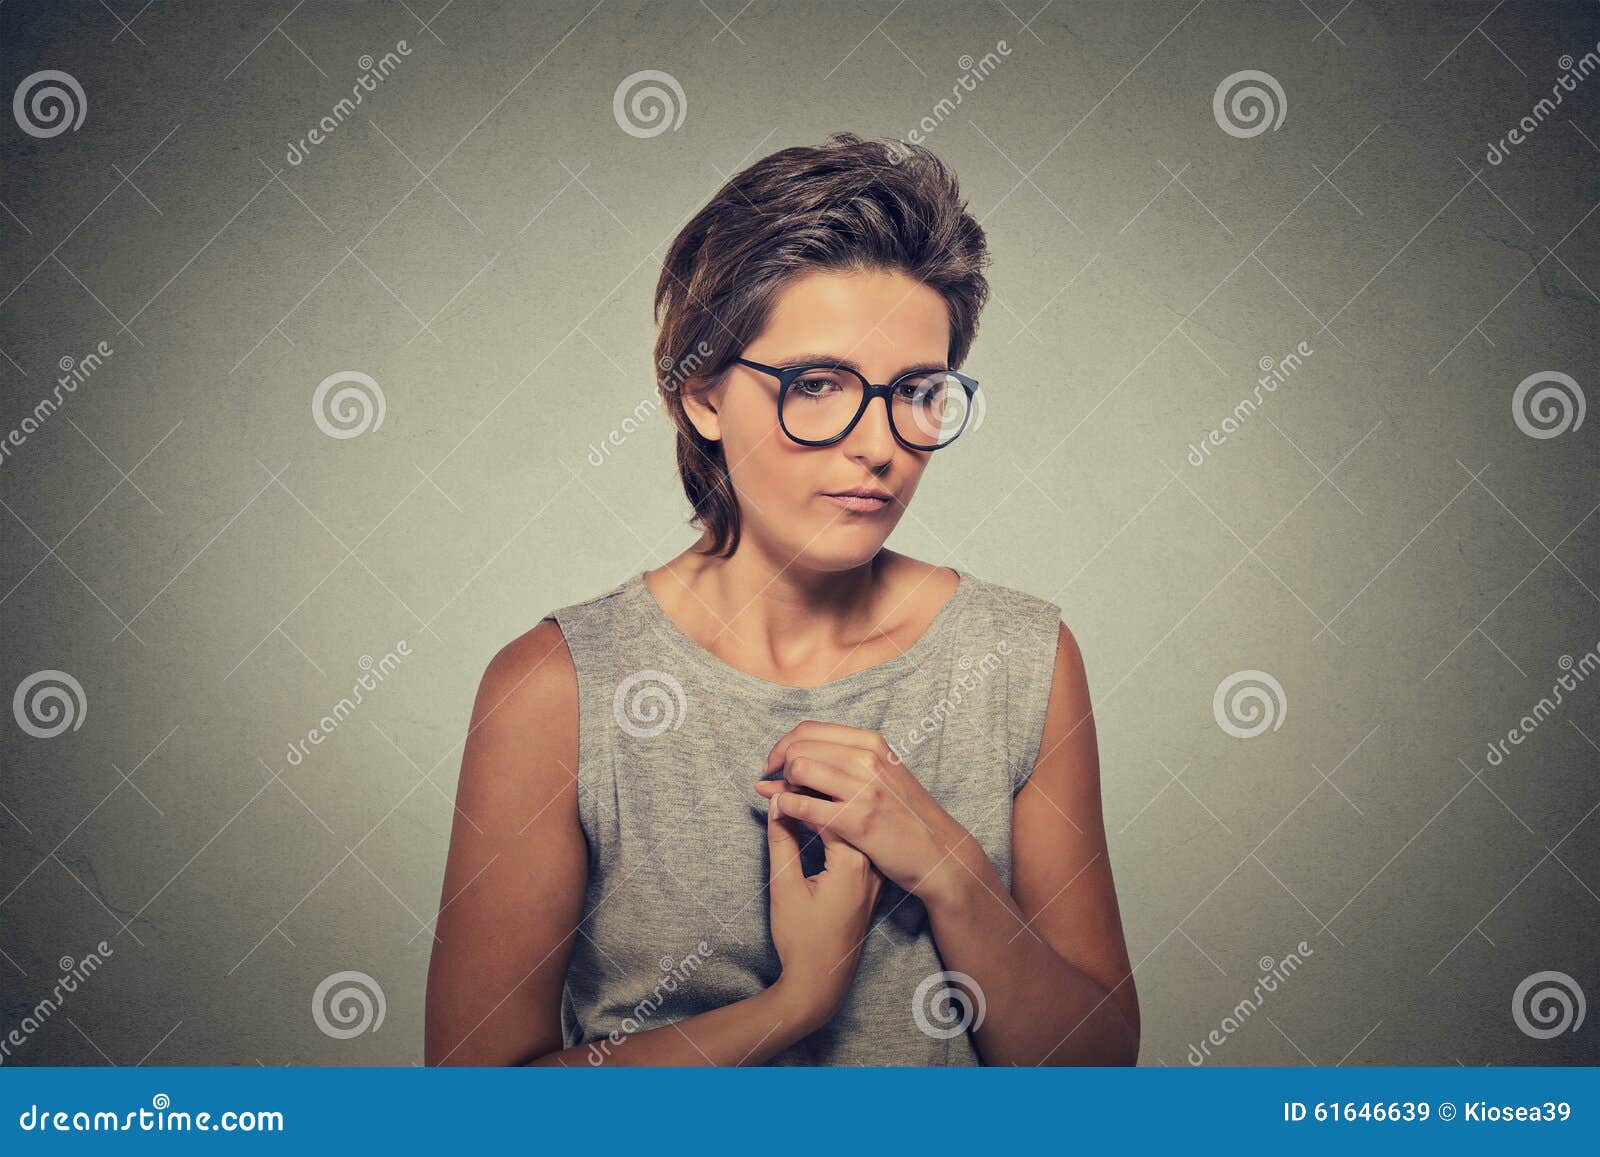 lack of confidence. shy young woman in glasses feels awkward